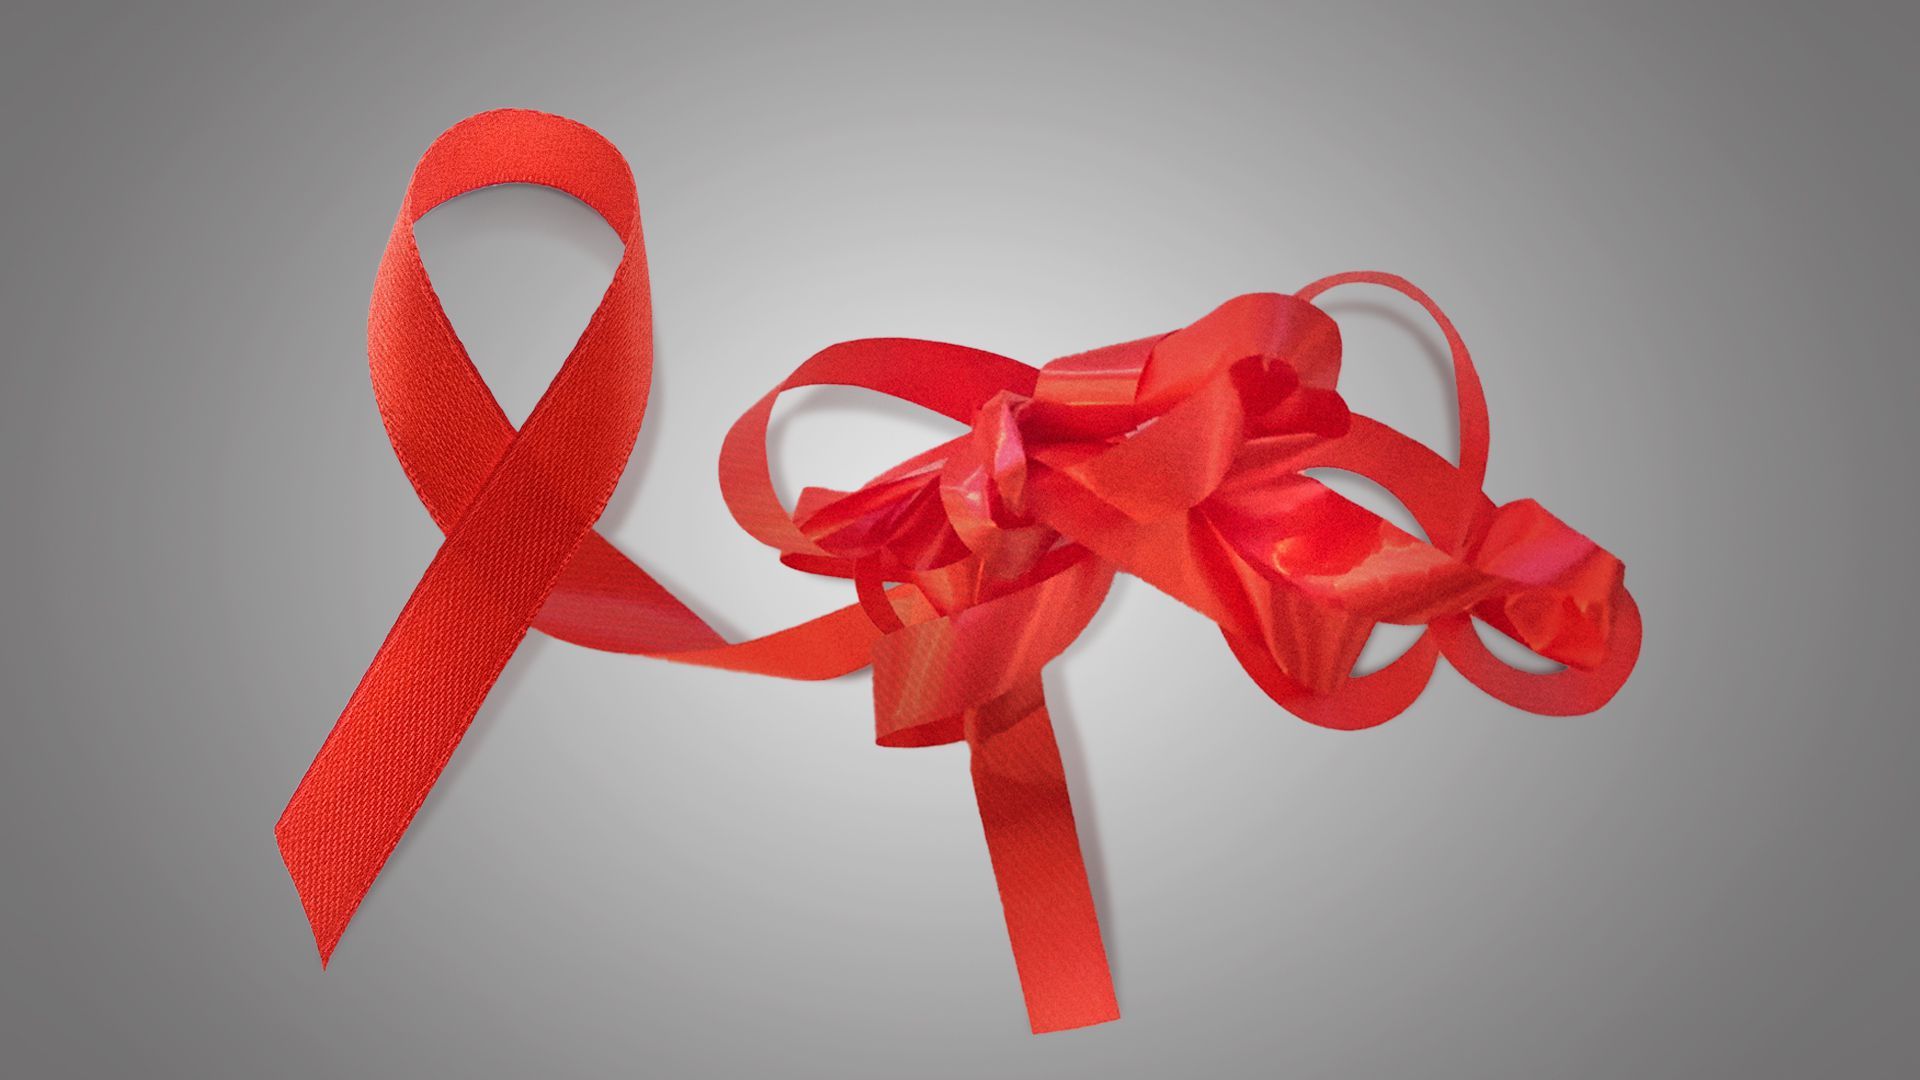 Illustration of a cause ribbon with one end tangled in a knot